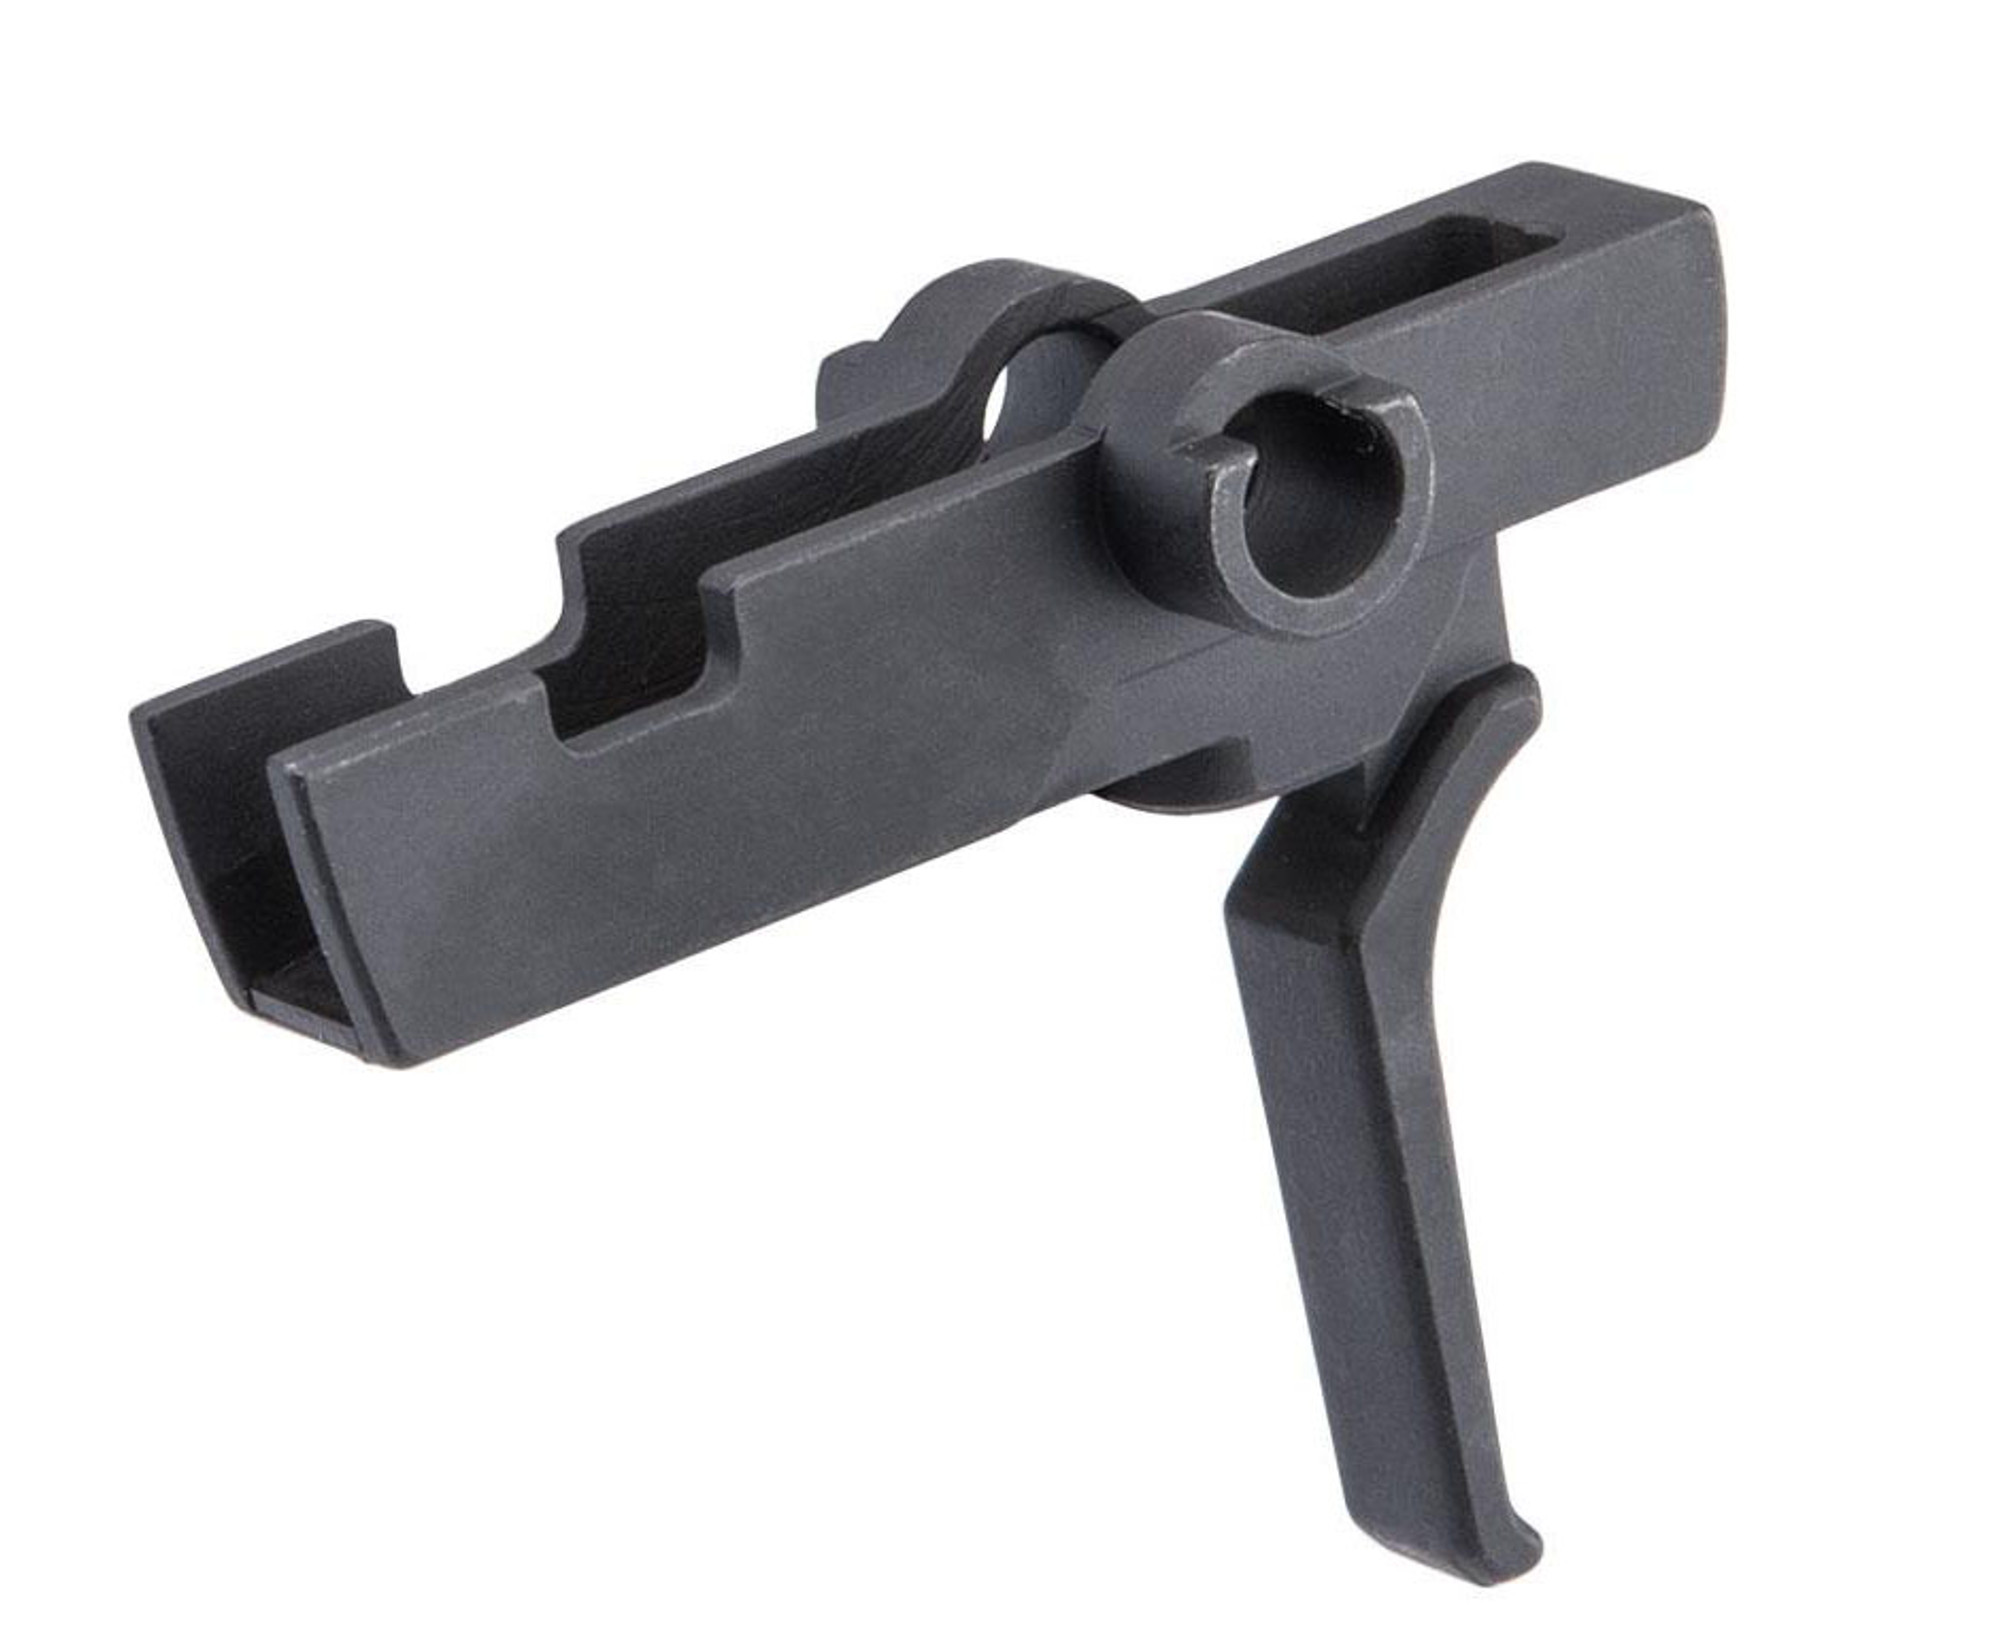 PTS / MEC PRO Trigger for KWA LM4 Gas Blowback Airsoft Rifles